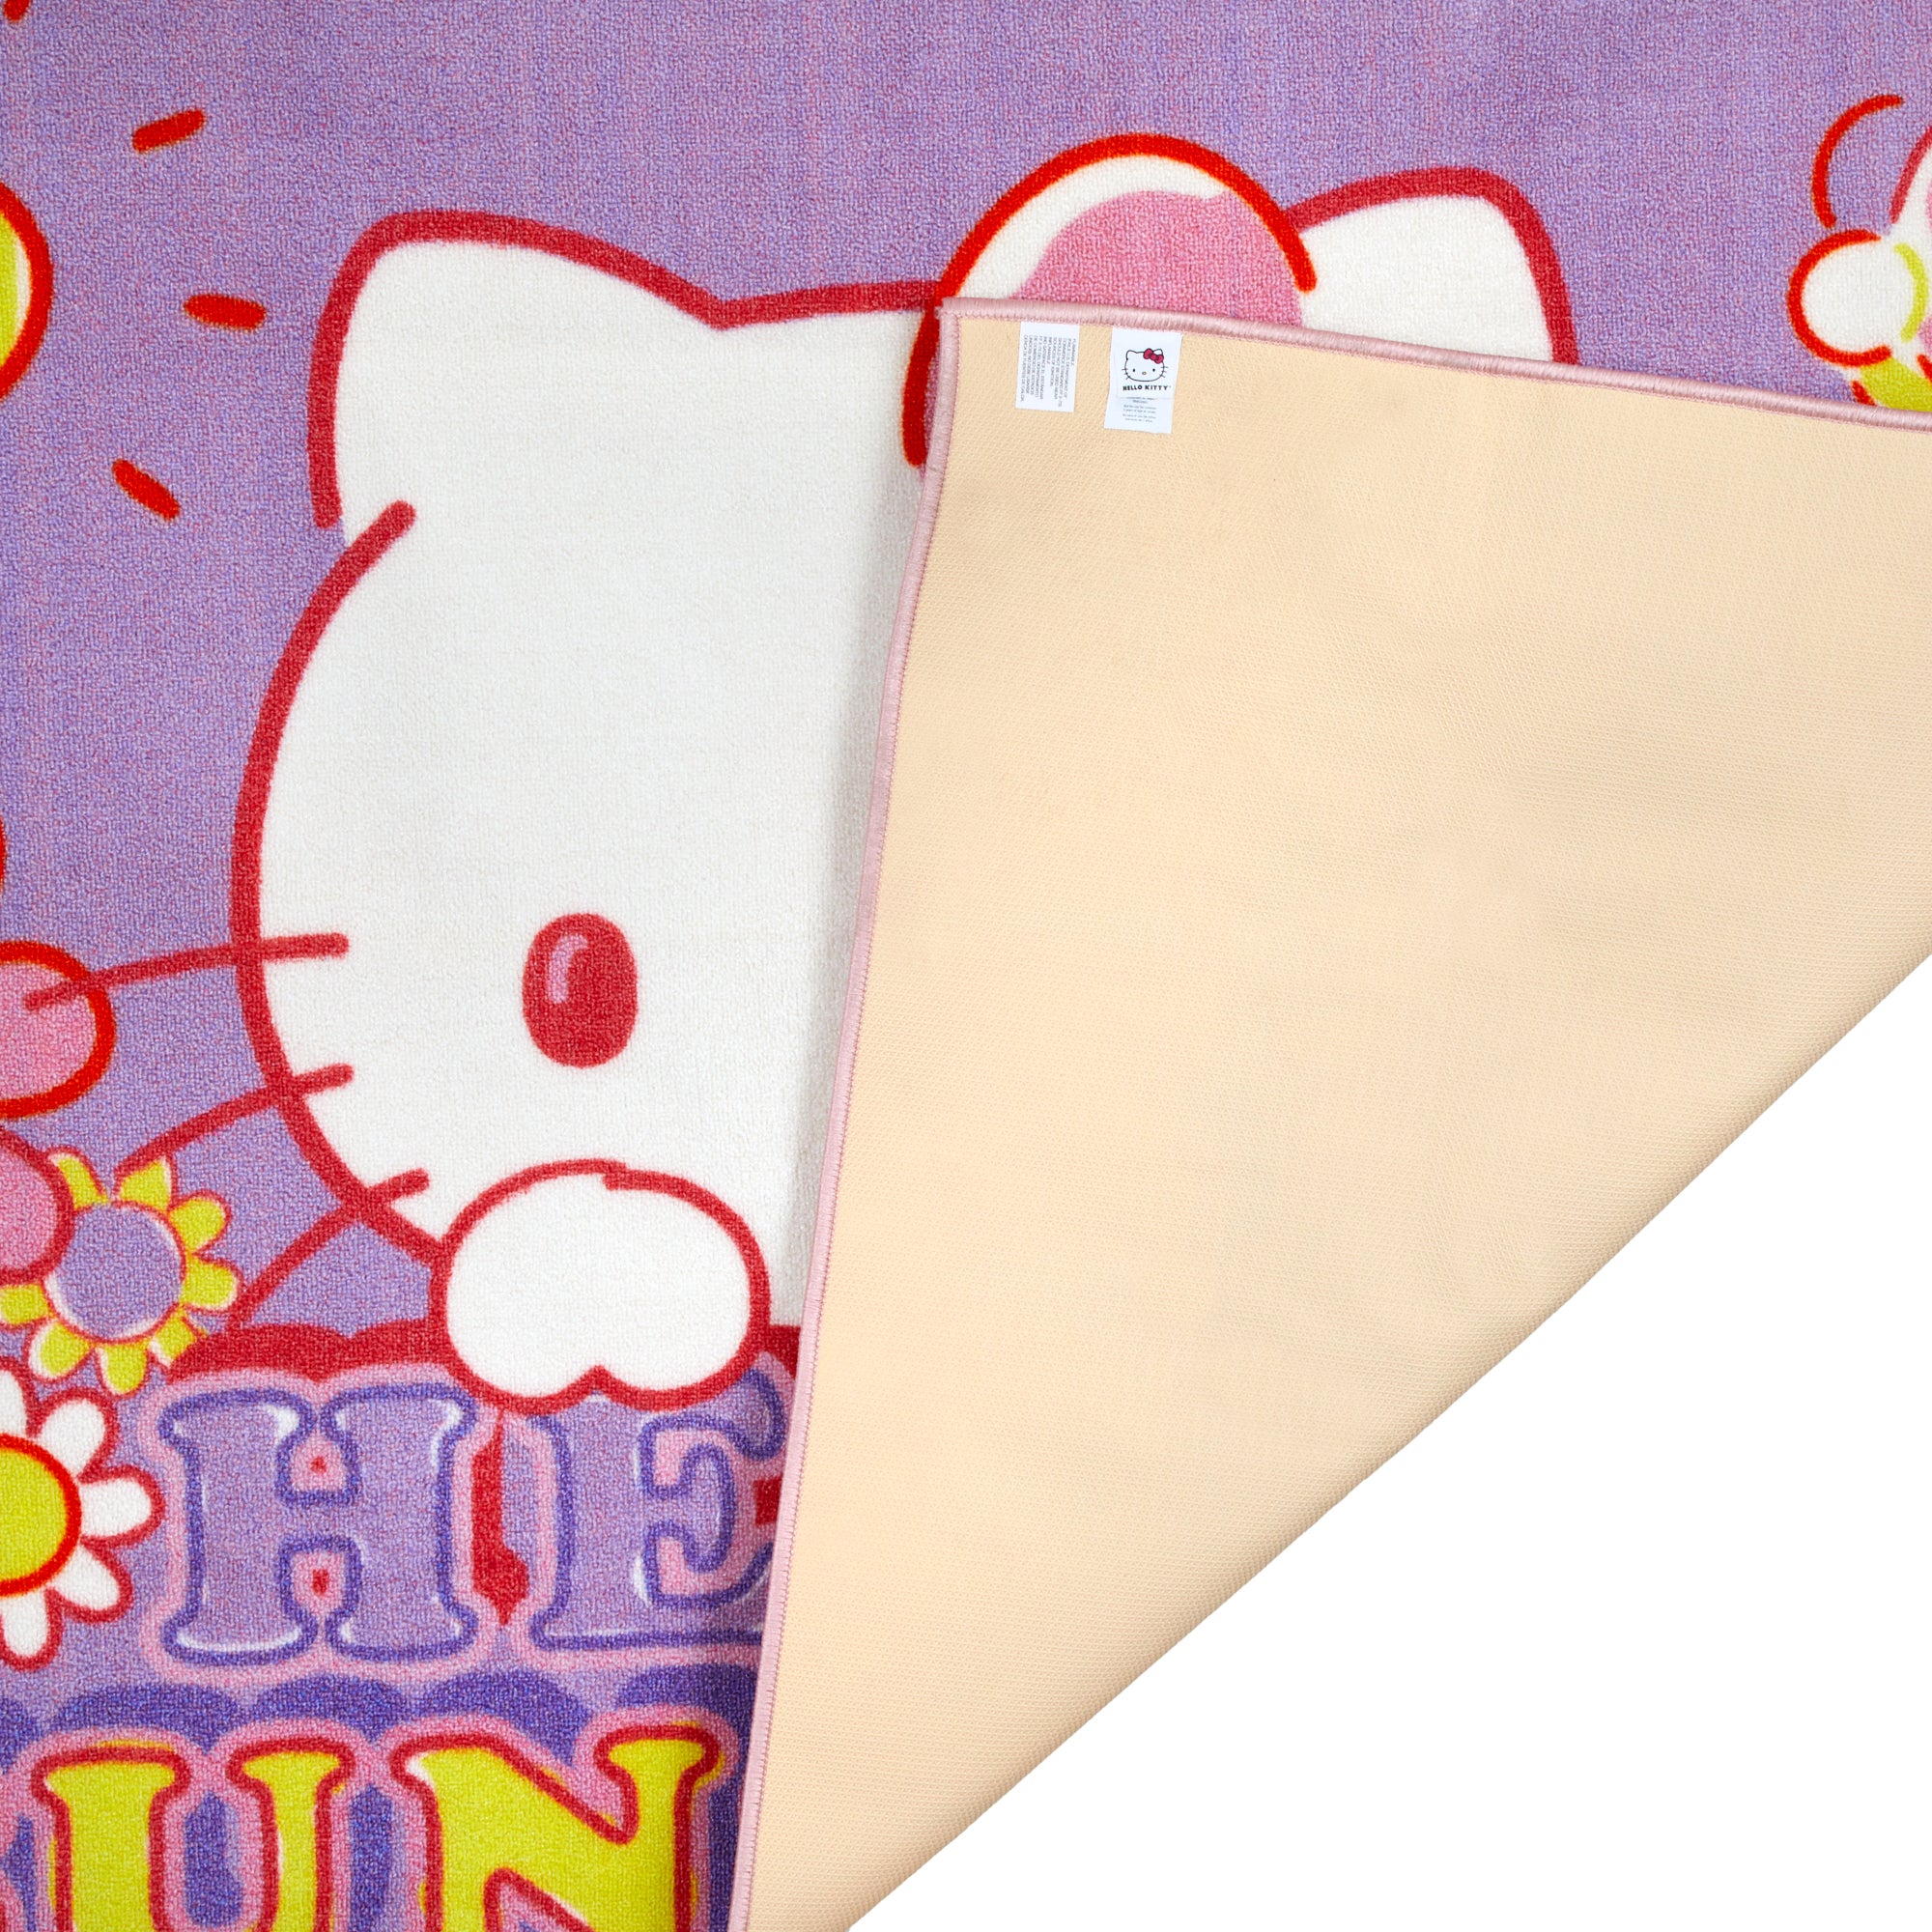 Franco Collectibles Sanrio Hello Kitty & Friends Super Soft Cotton  Bath/Pool/Beach Towel, 60 in x 30 in, (Official Licensed Product)